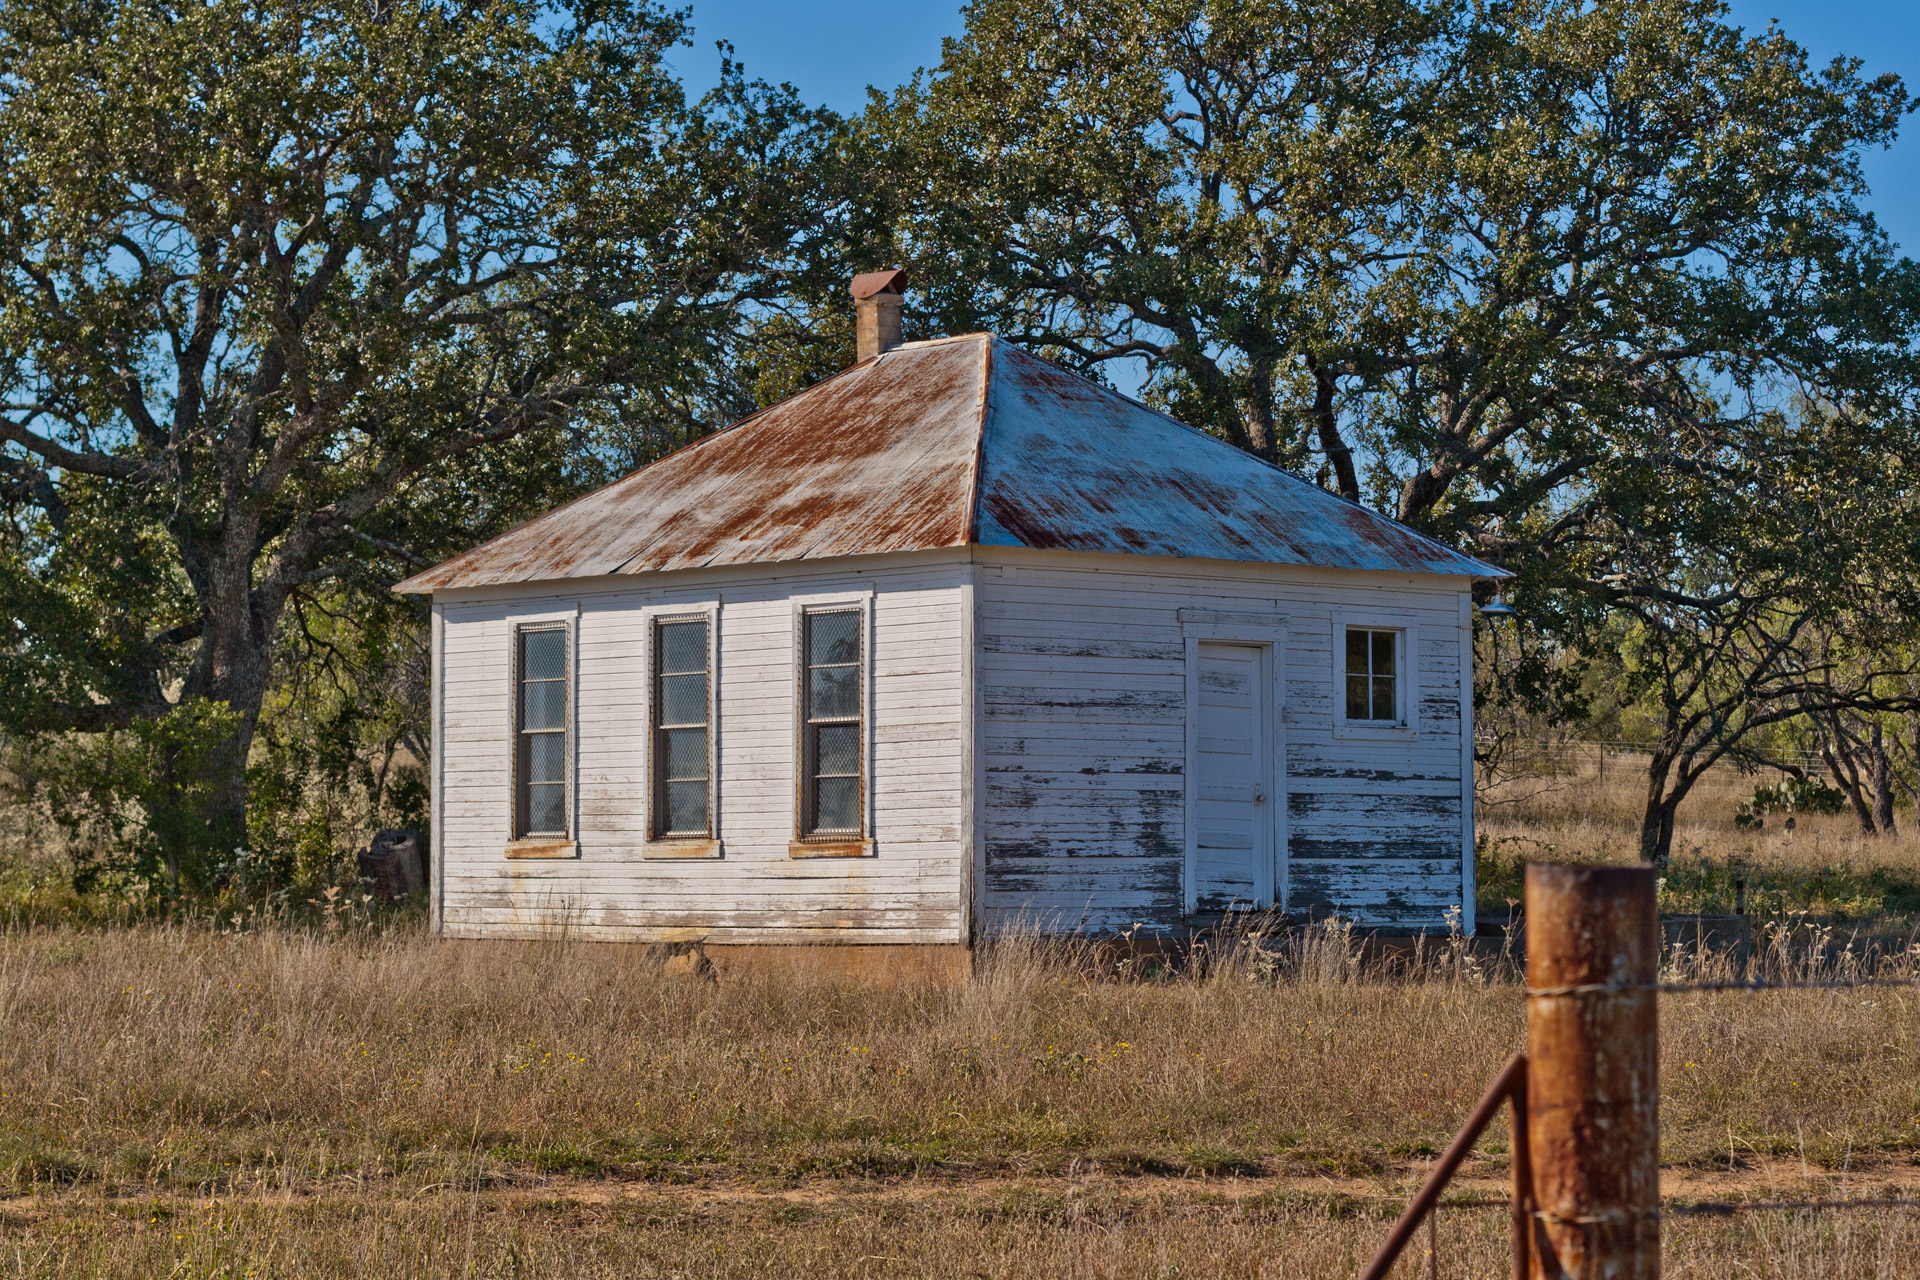 Fly Gap, Texas - The One-Room Schoolhouse (side close)